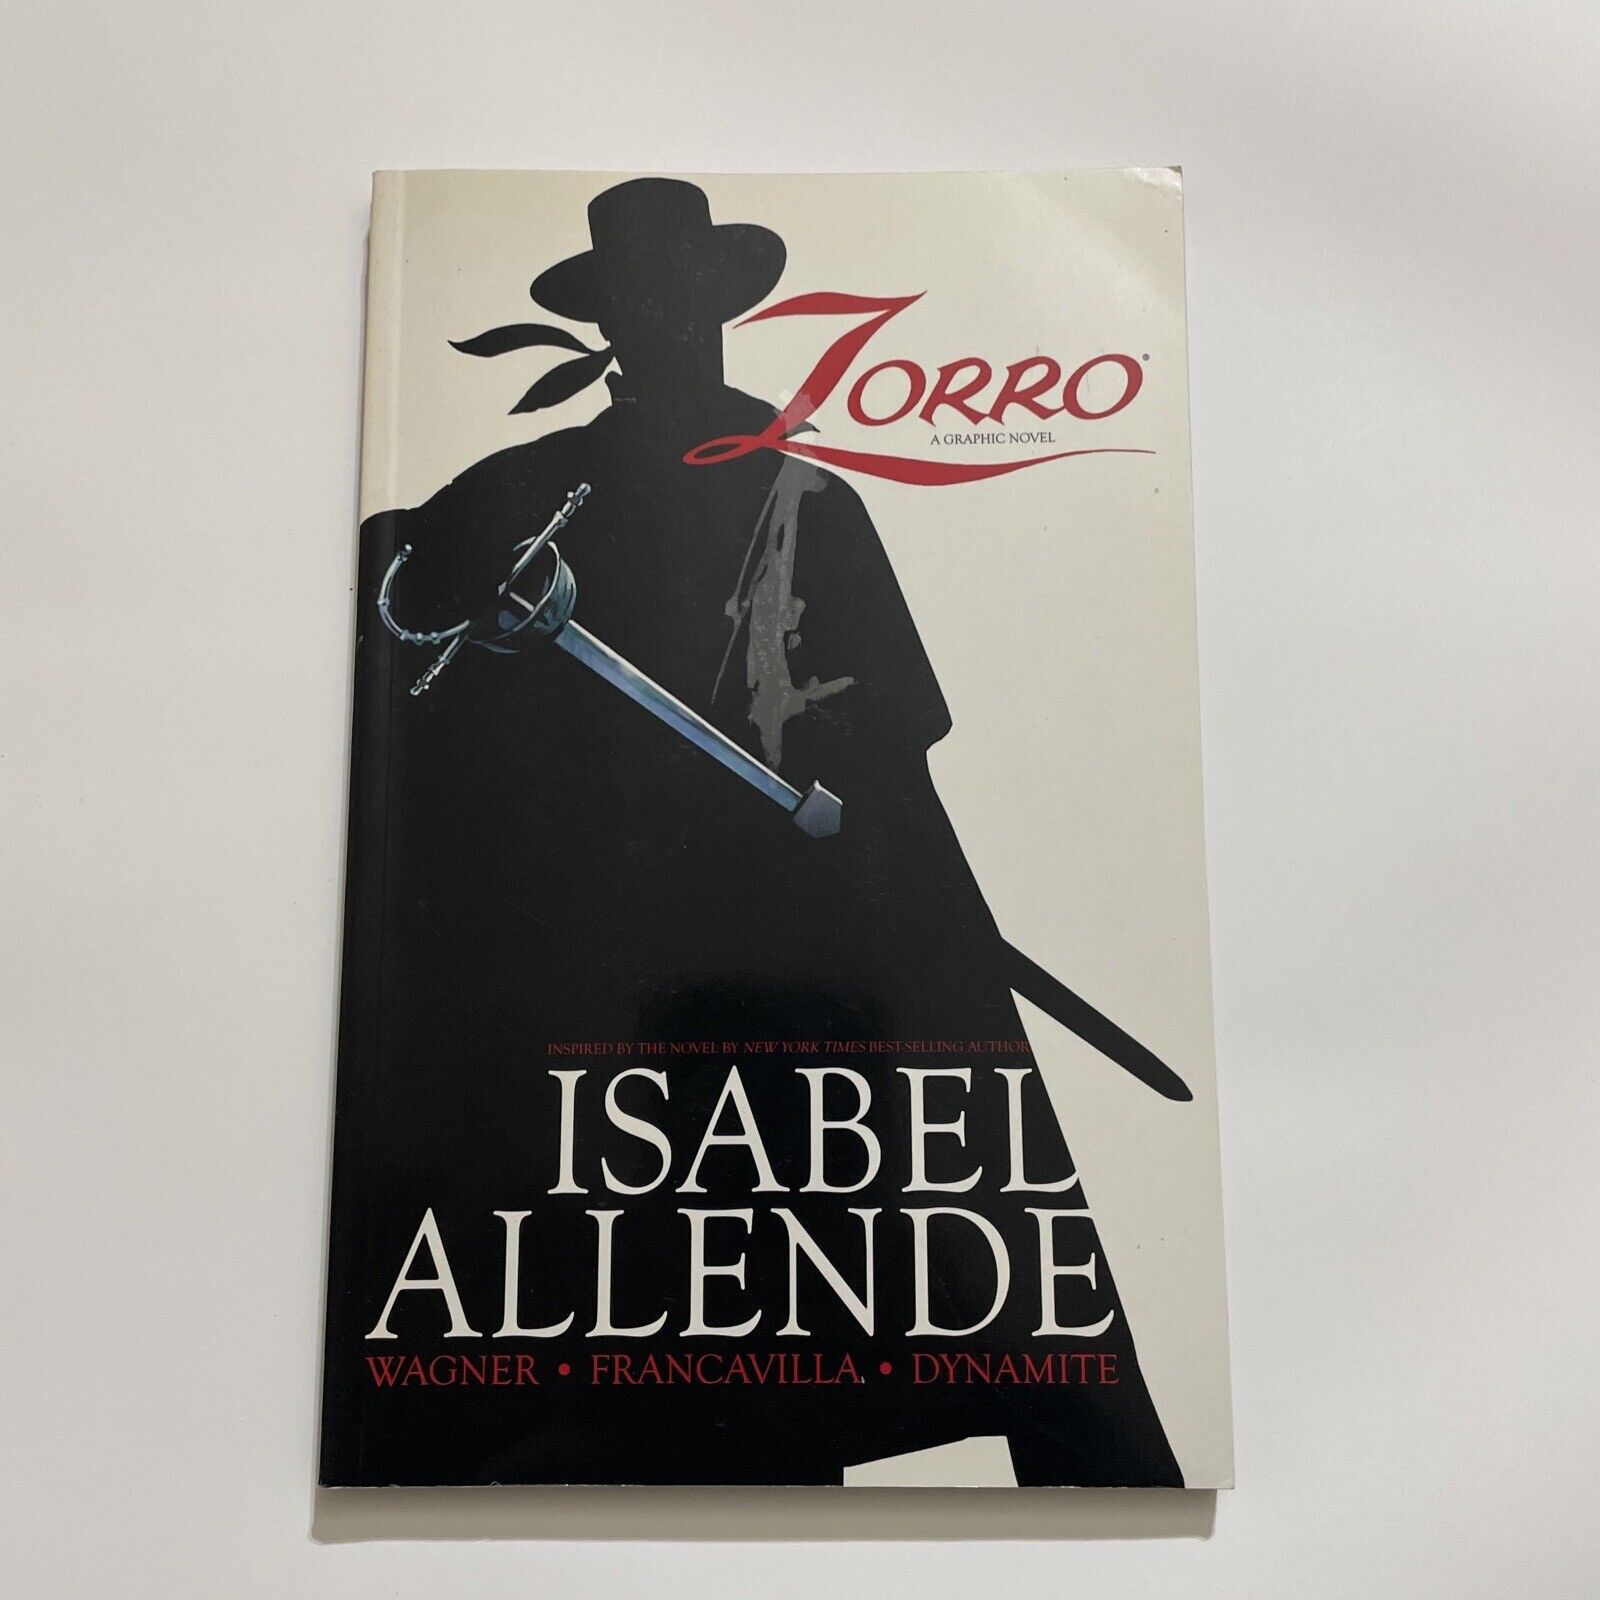 ZORRO by Isabel Allende  2008 1st Edition Dynamite Entertainment VTG